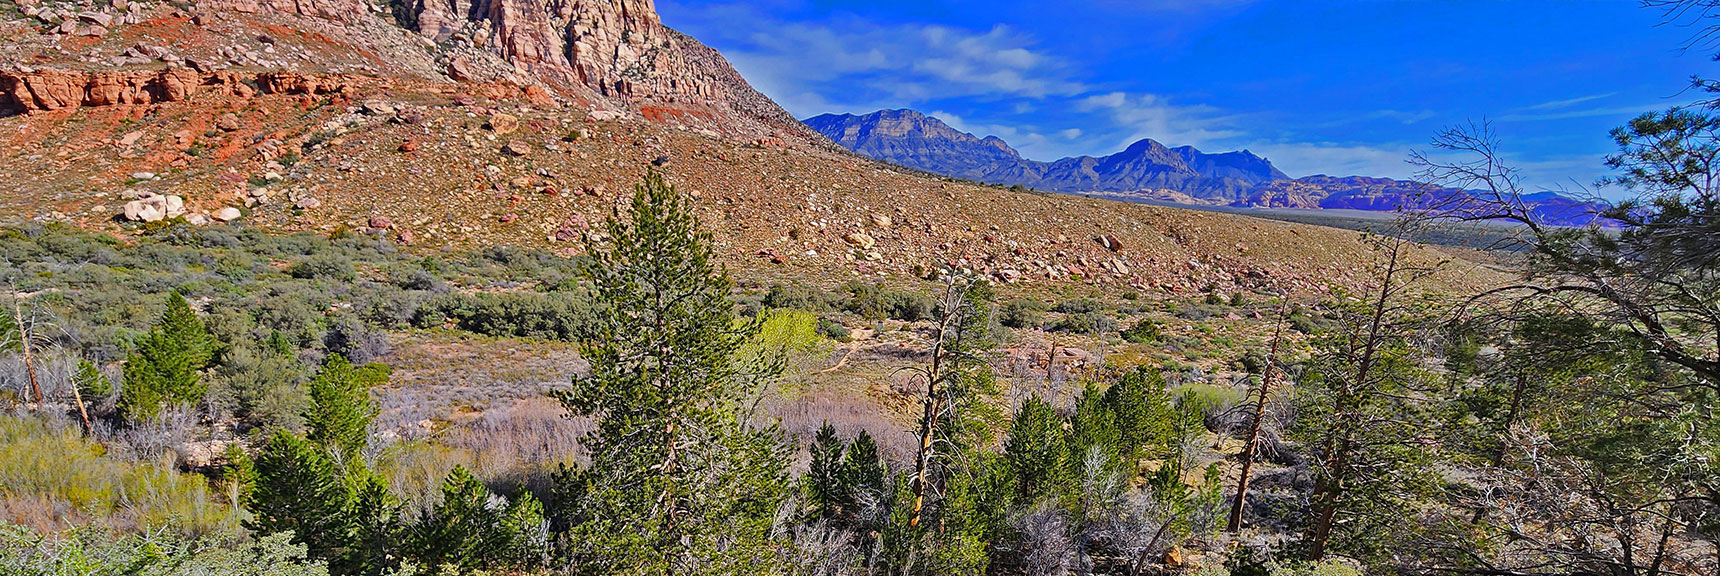 View North Across Pine Creek Canyon | Knoll Trail | Red Rock Canyon National Conservation Area, Nevada | David Smith | LasVegasAreaTrails.com